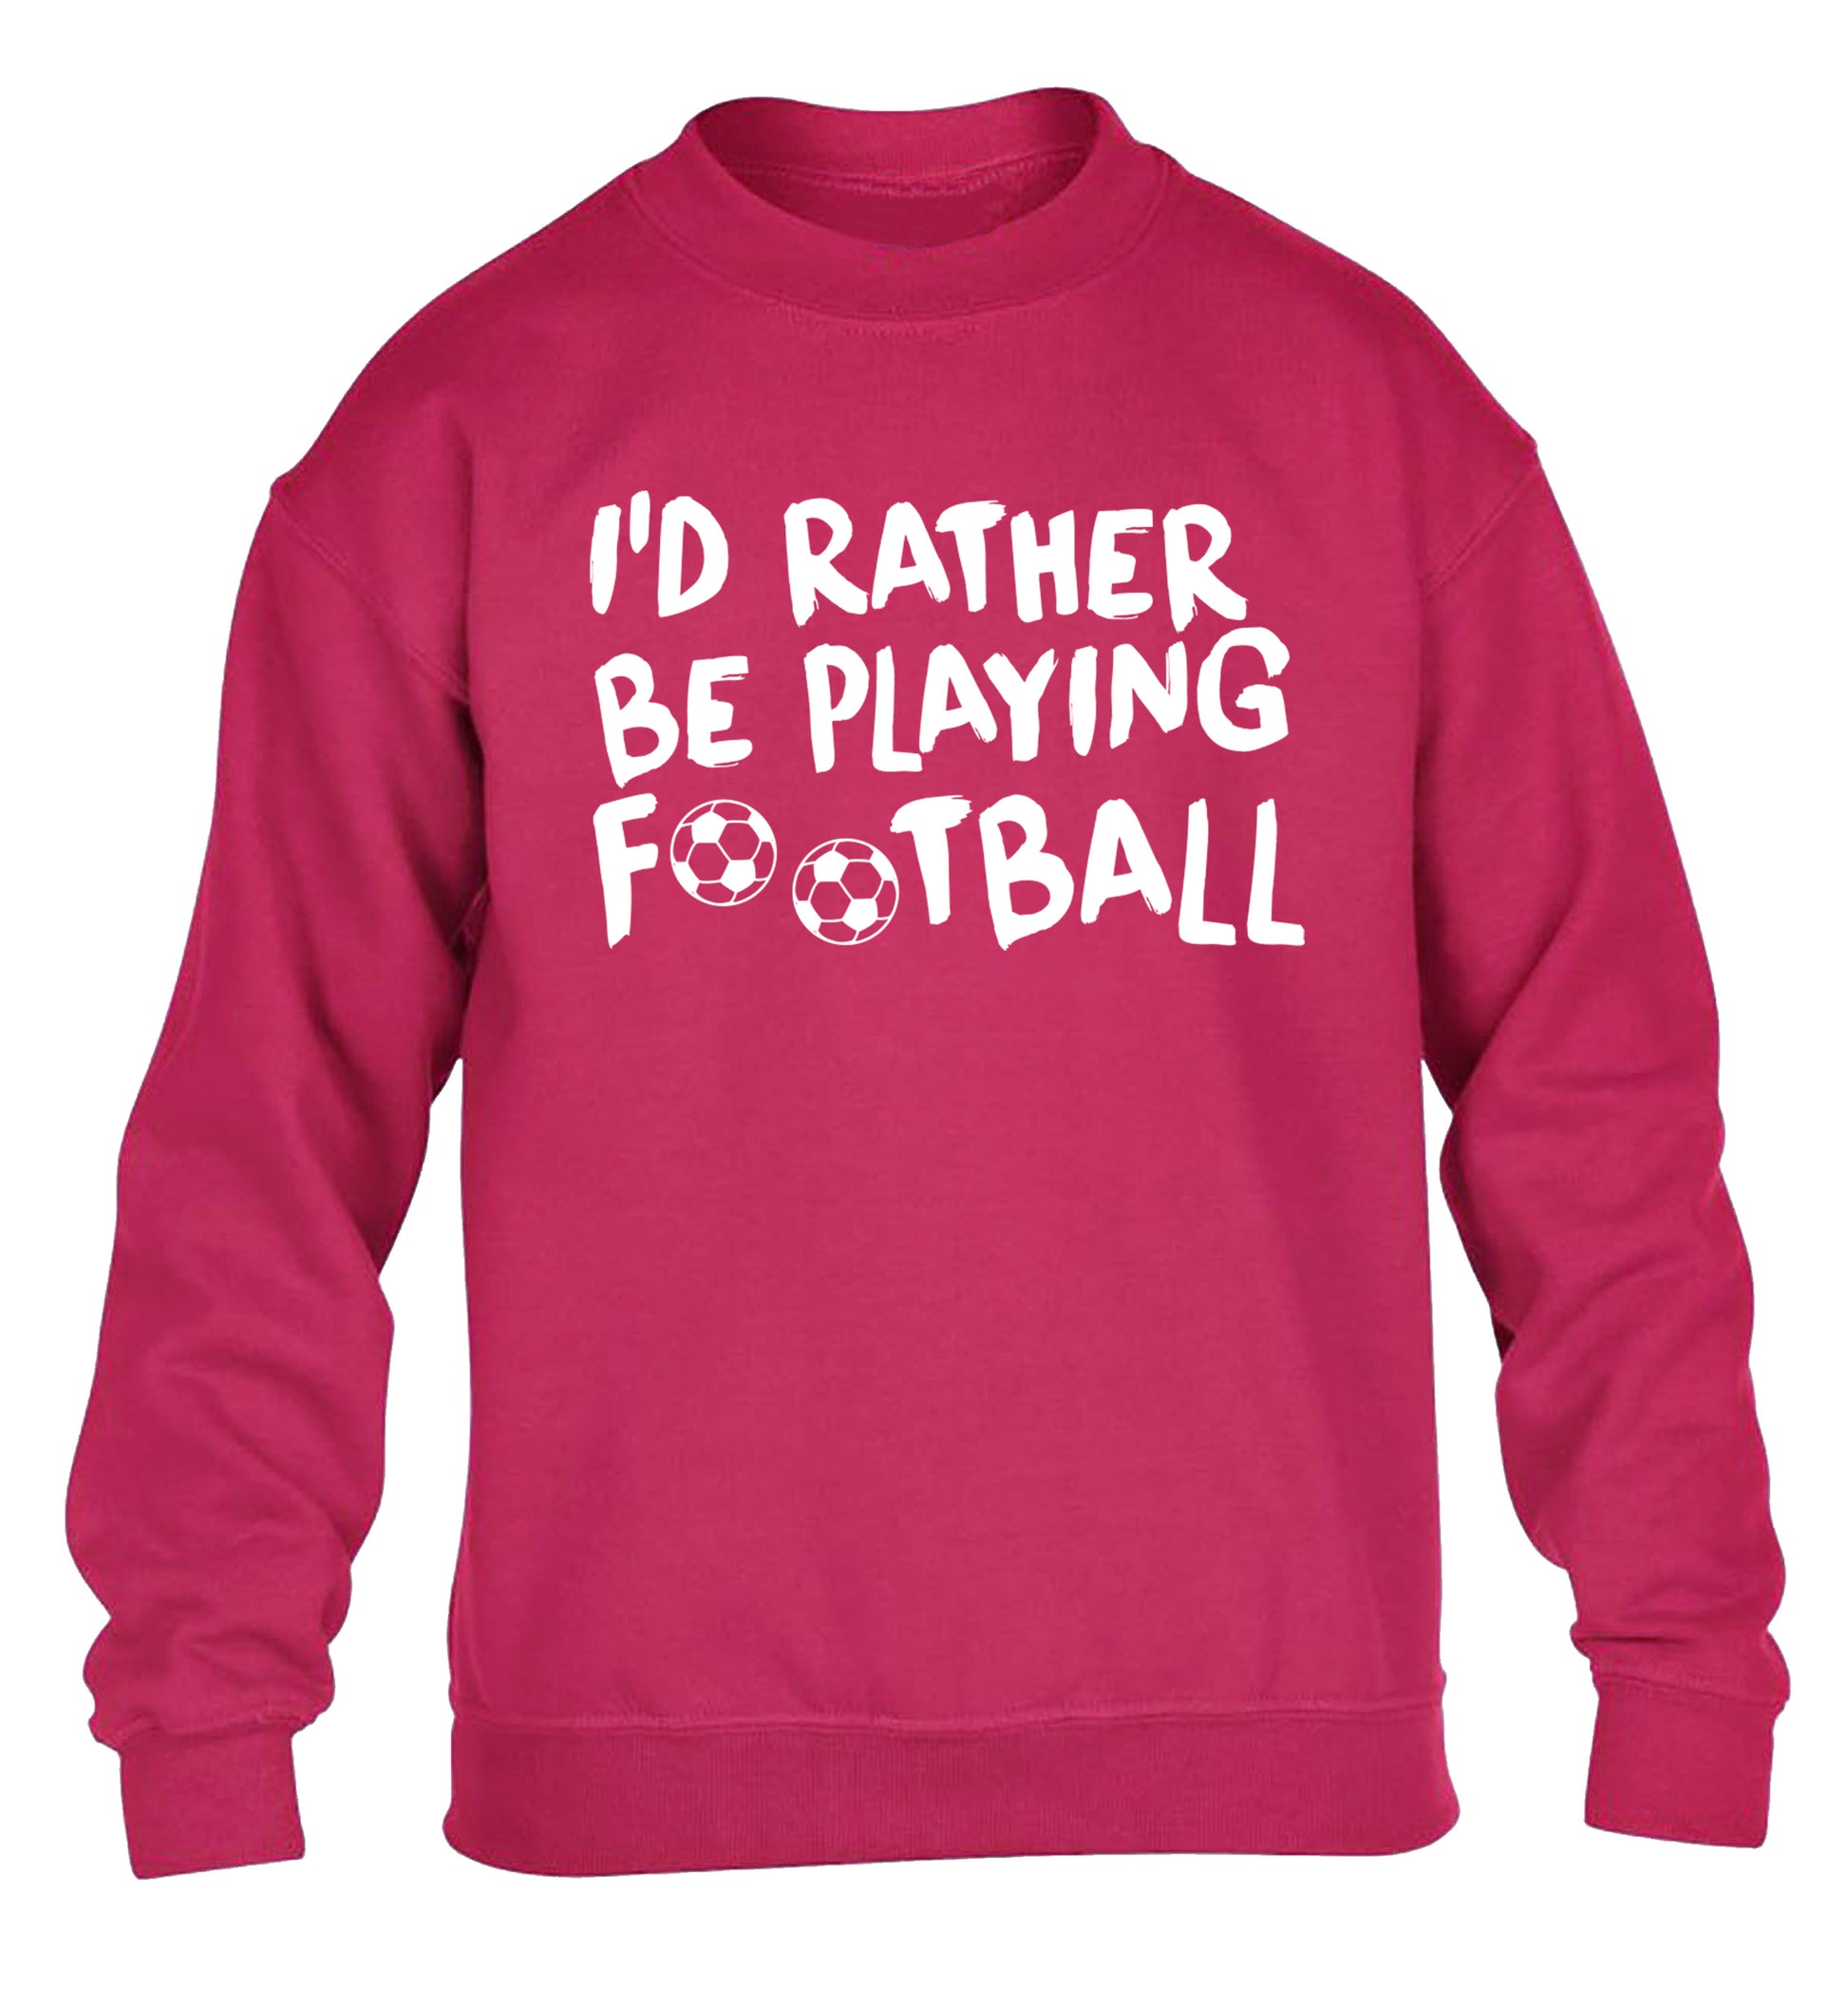 I'd rather be playing football children's pink sweater 12-14 Years